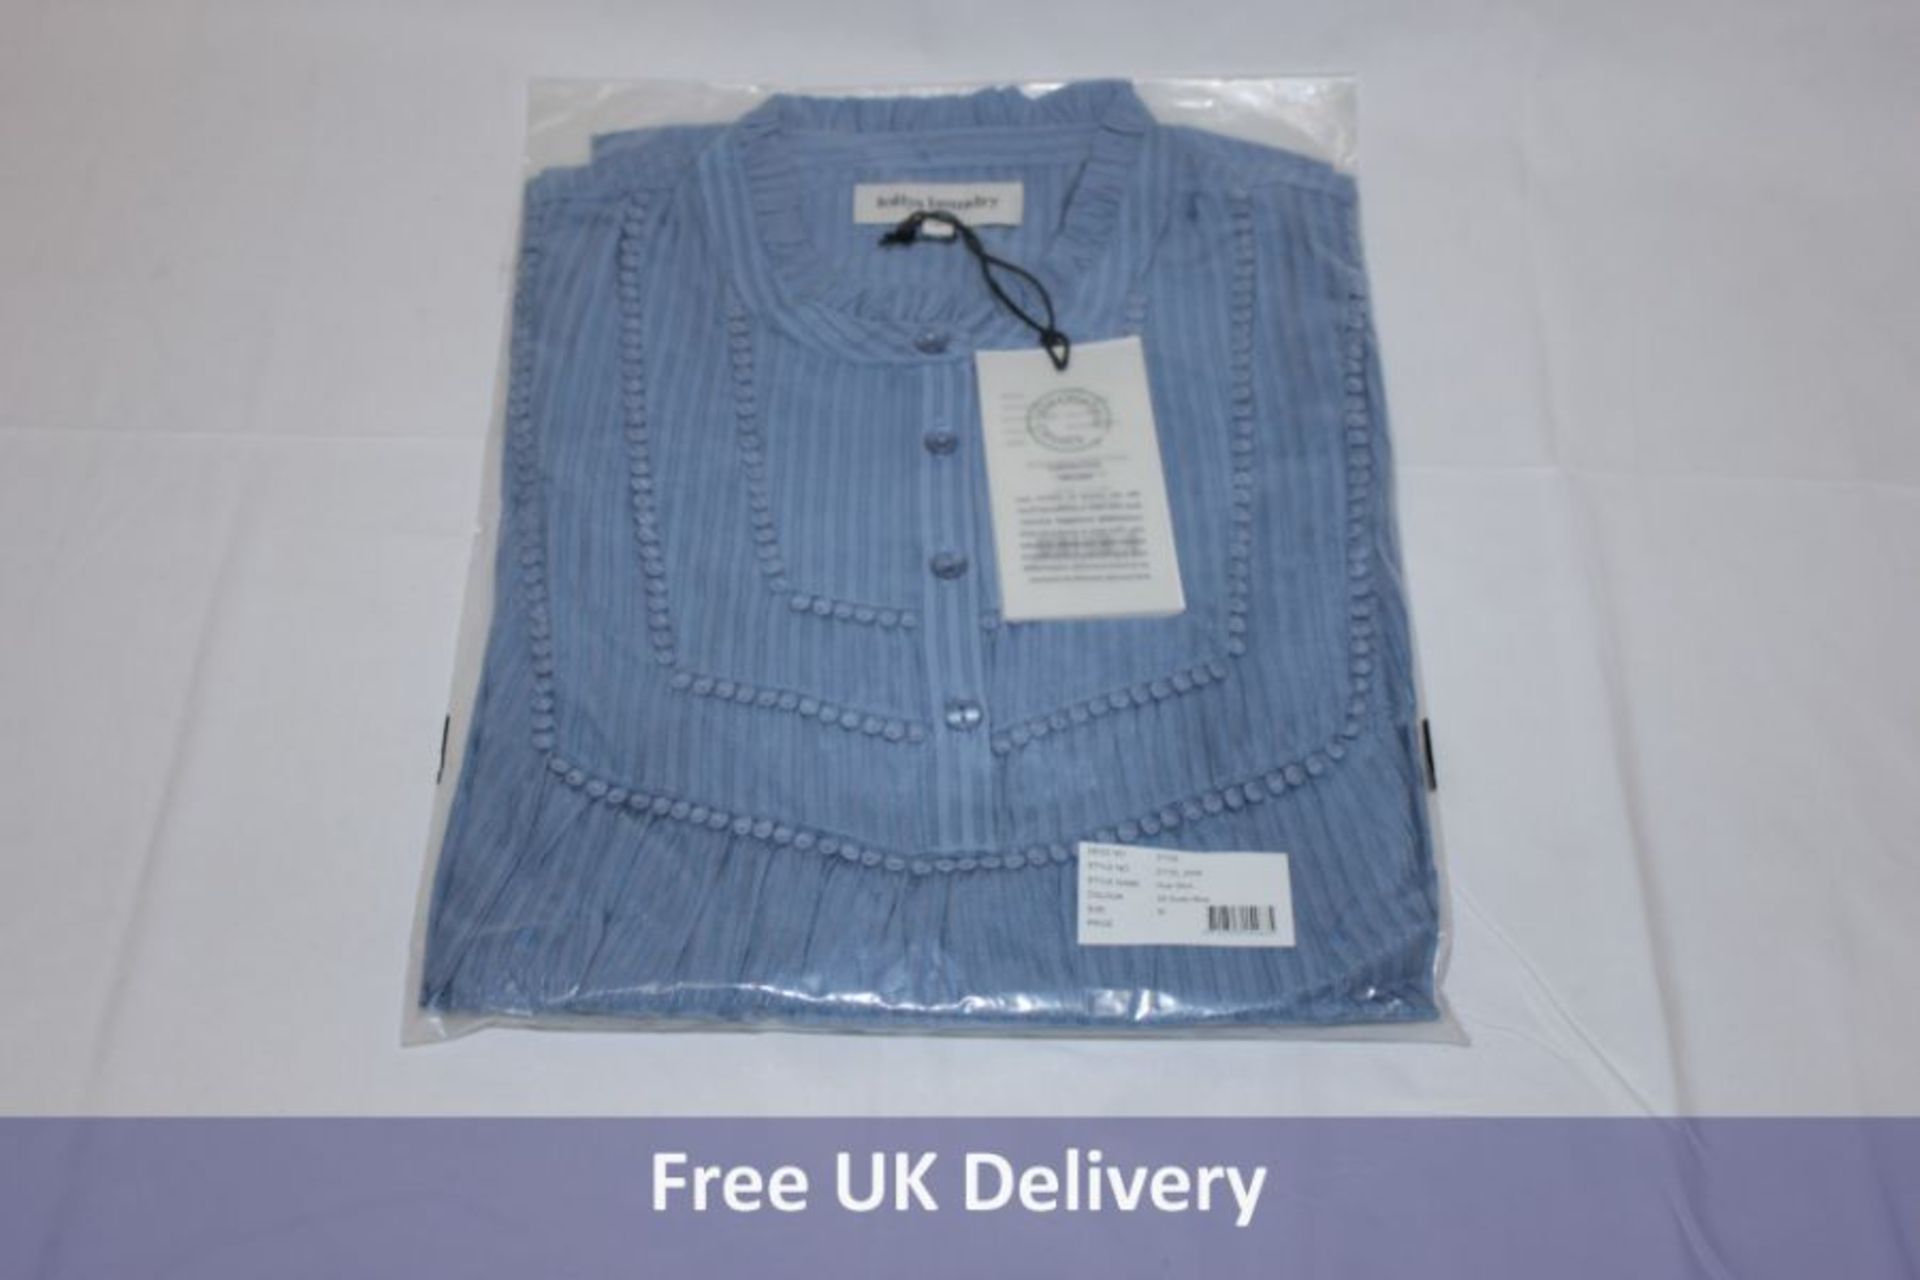 Three Lollys Laundry Huxi Shirt, Dusty Blue to include 1x Size S, 1x Size M and 1x Size L